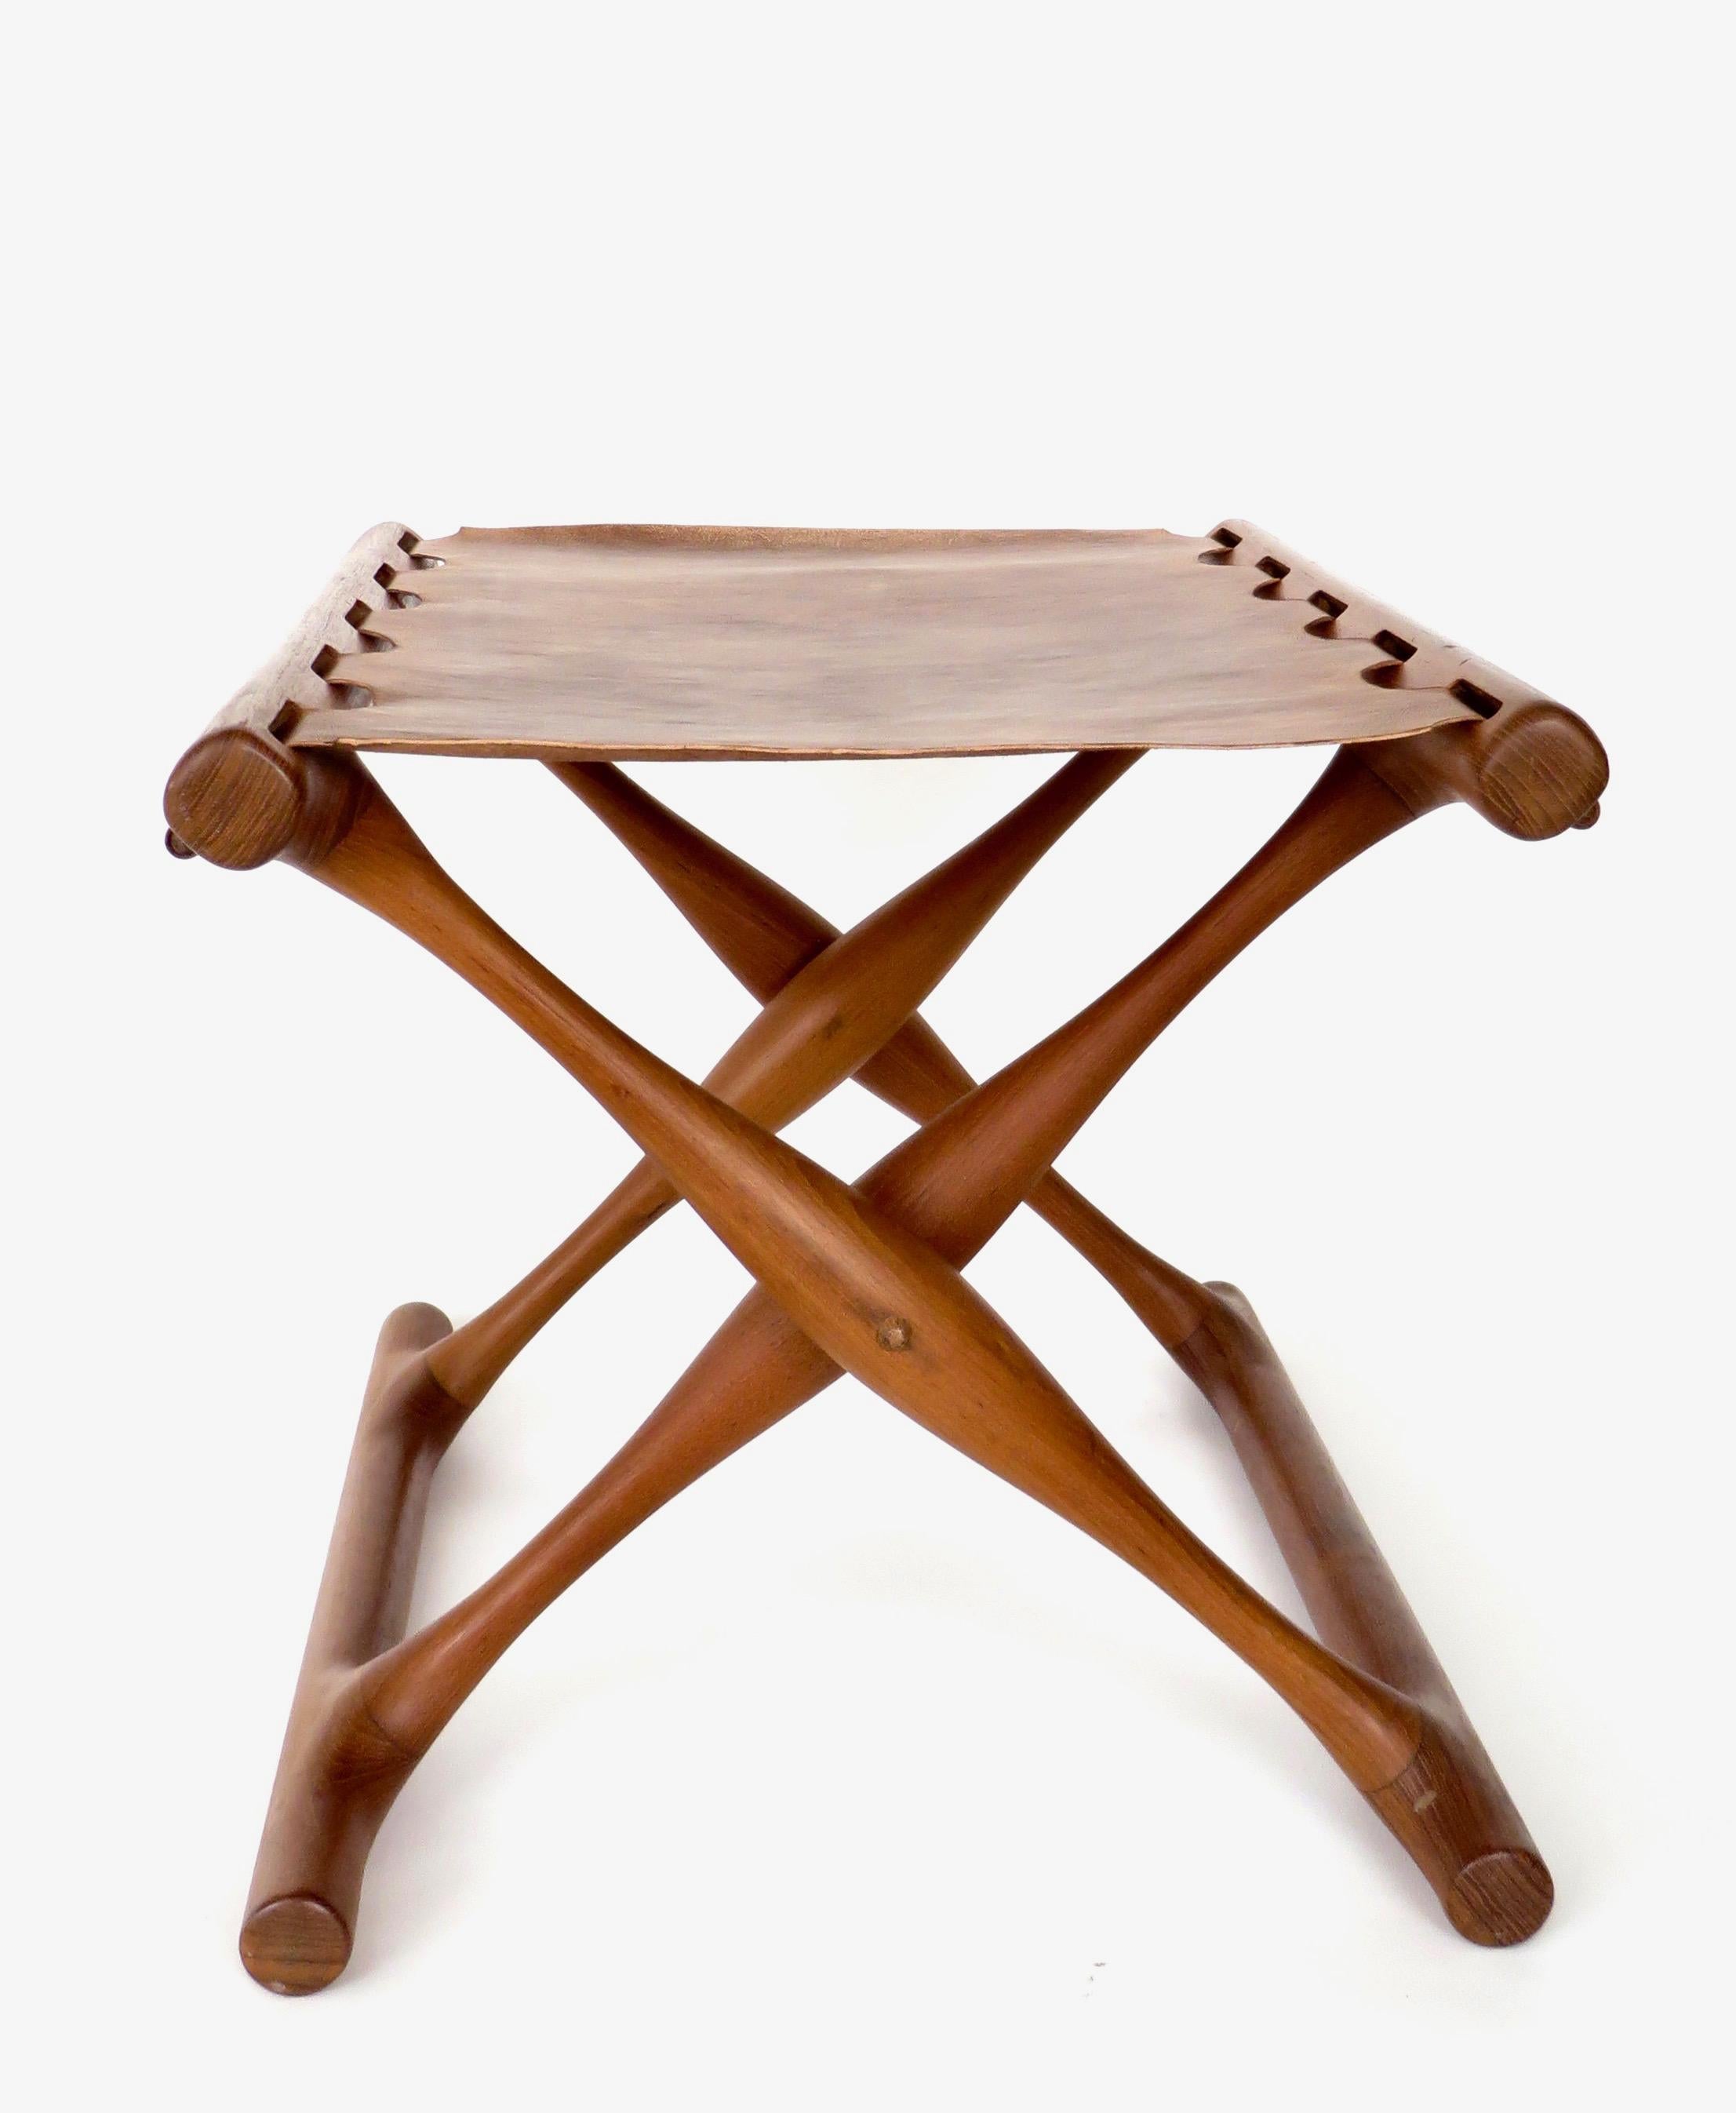 Danish modern teak and leather folding stool by Poul Hundevad, Denmark, circa 1960s. The leather has been replaced as the original leather was very fragile and tore but still available to include in the purchase. 
This sculptural folding stool is